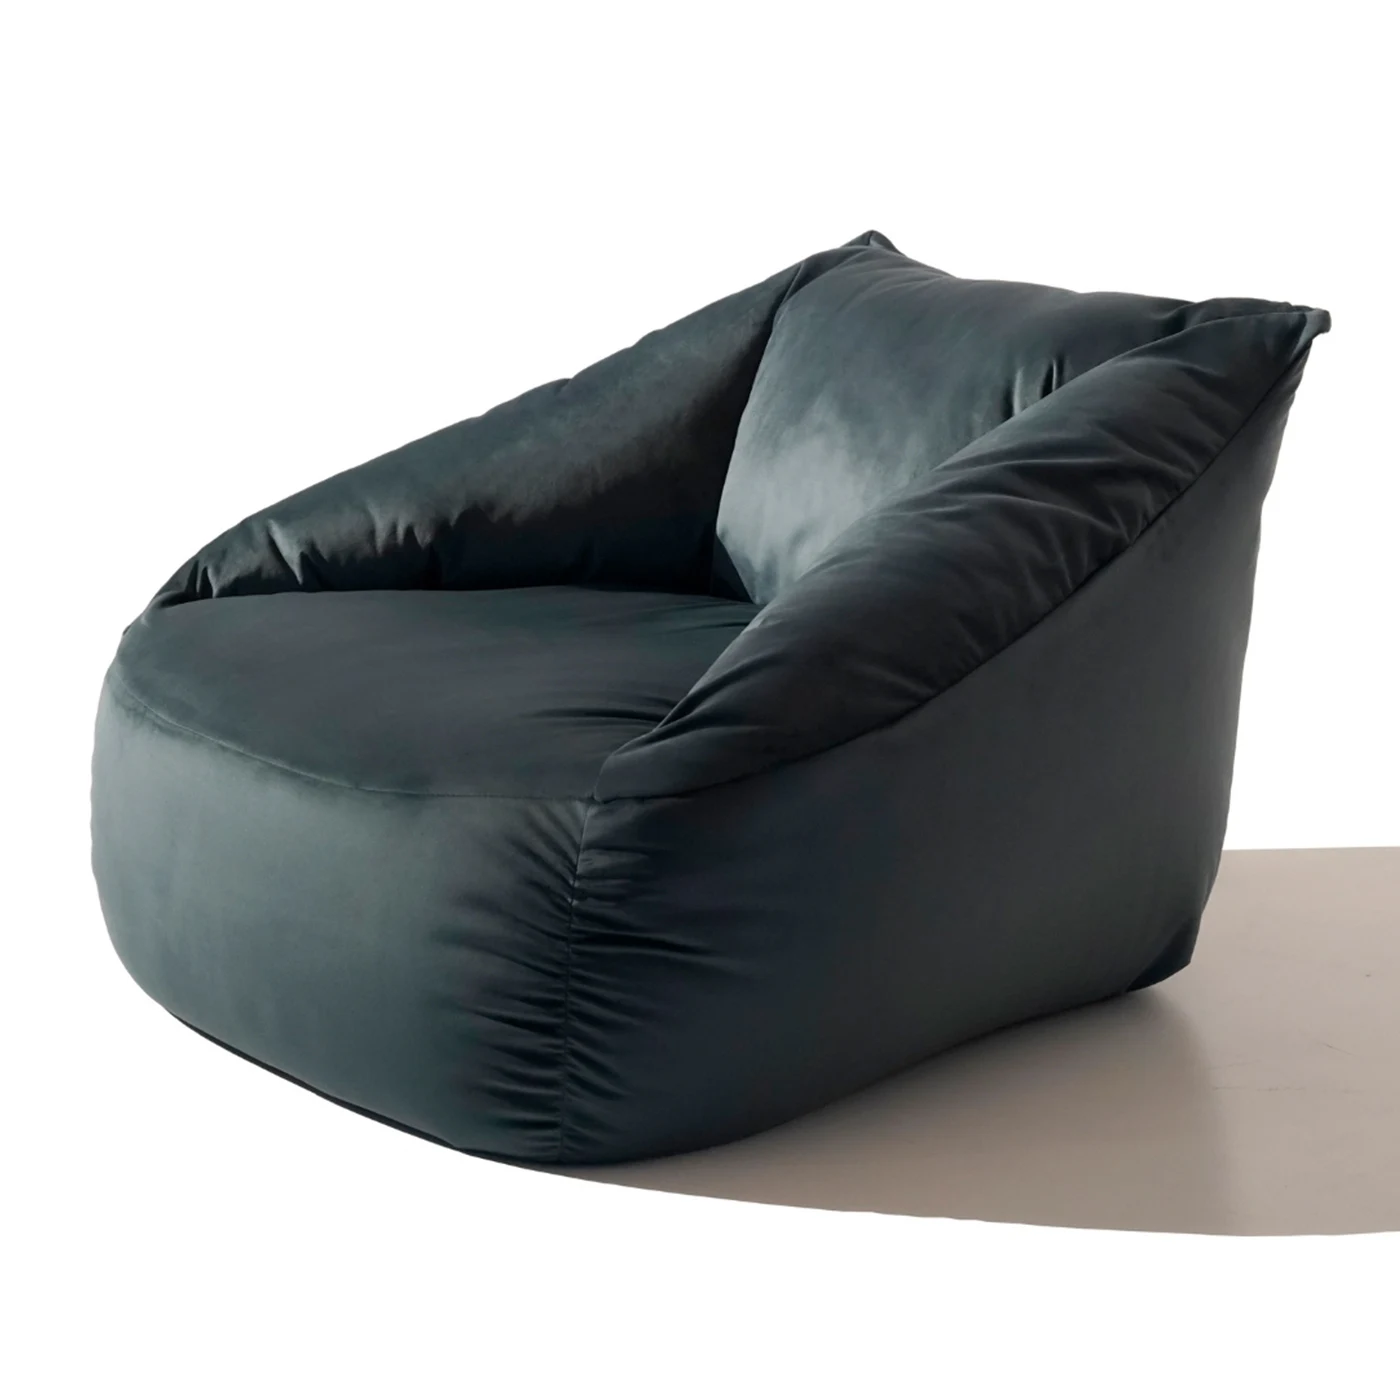 BOTERO ARMCHAIR BY MARCO AND GIULIO MANTELLASSI